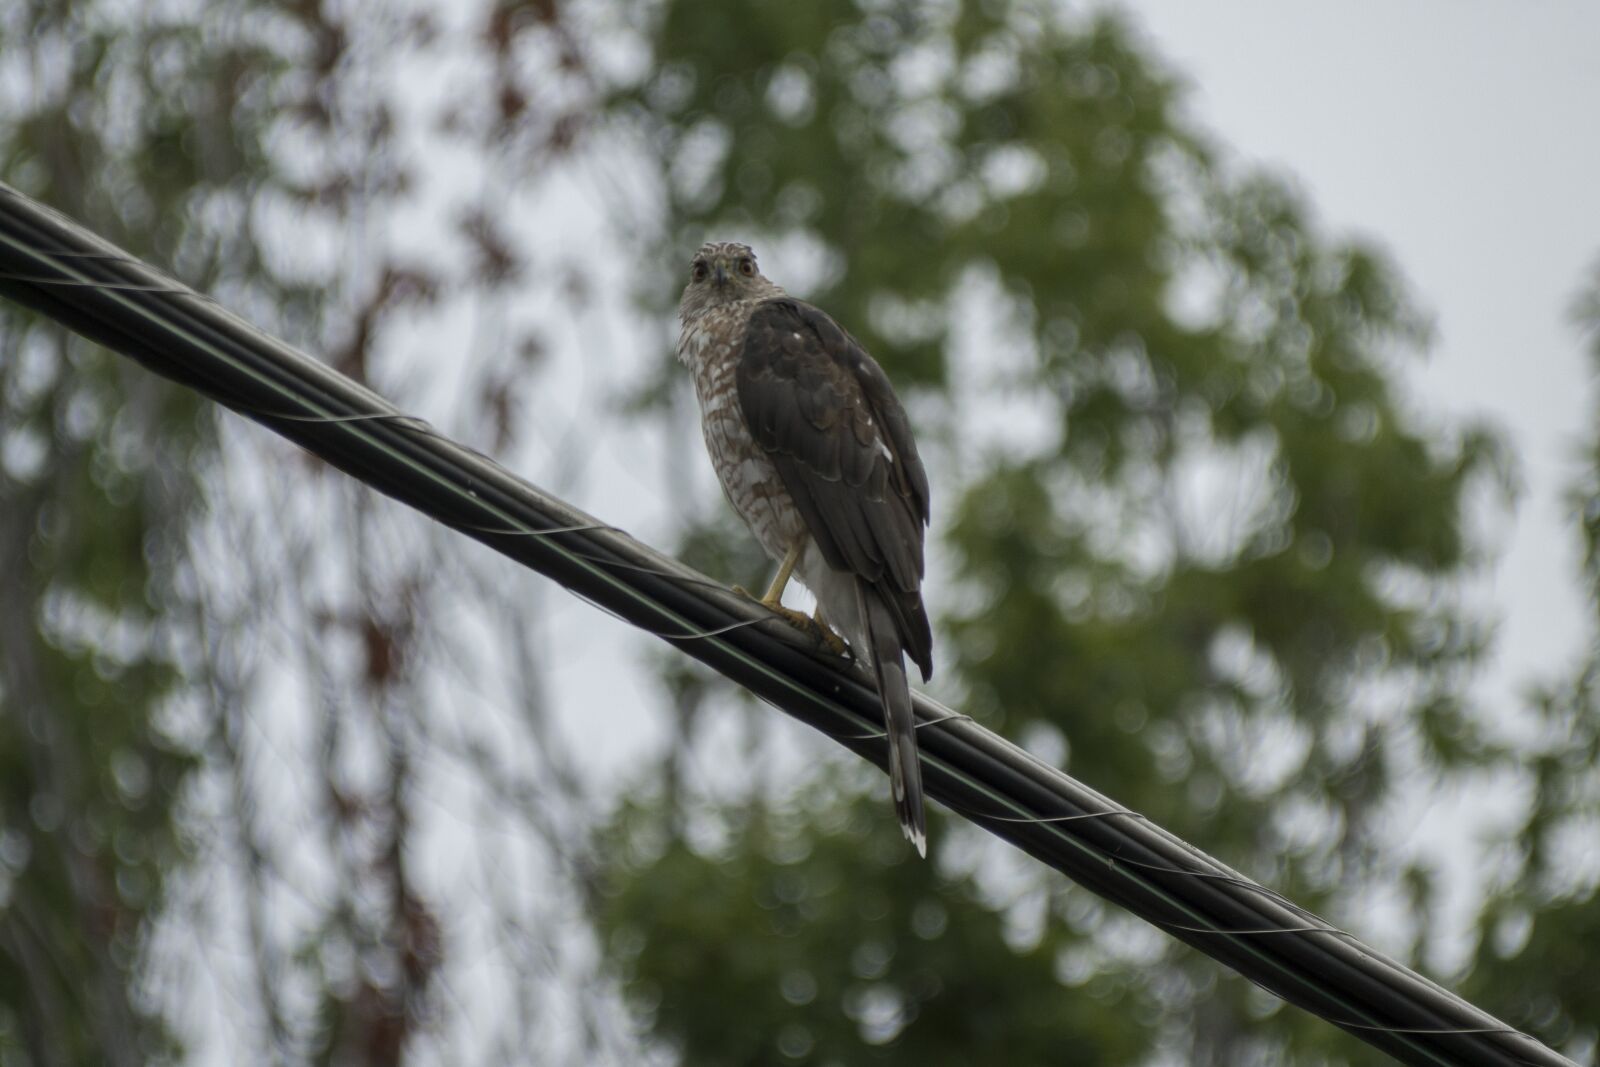 Sony a6300 + 18-300mm F3.5-6.3 DC MACRO OS HSM | Contemporary 014 sample photo. Hawk, wildlife, nature photography